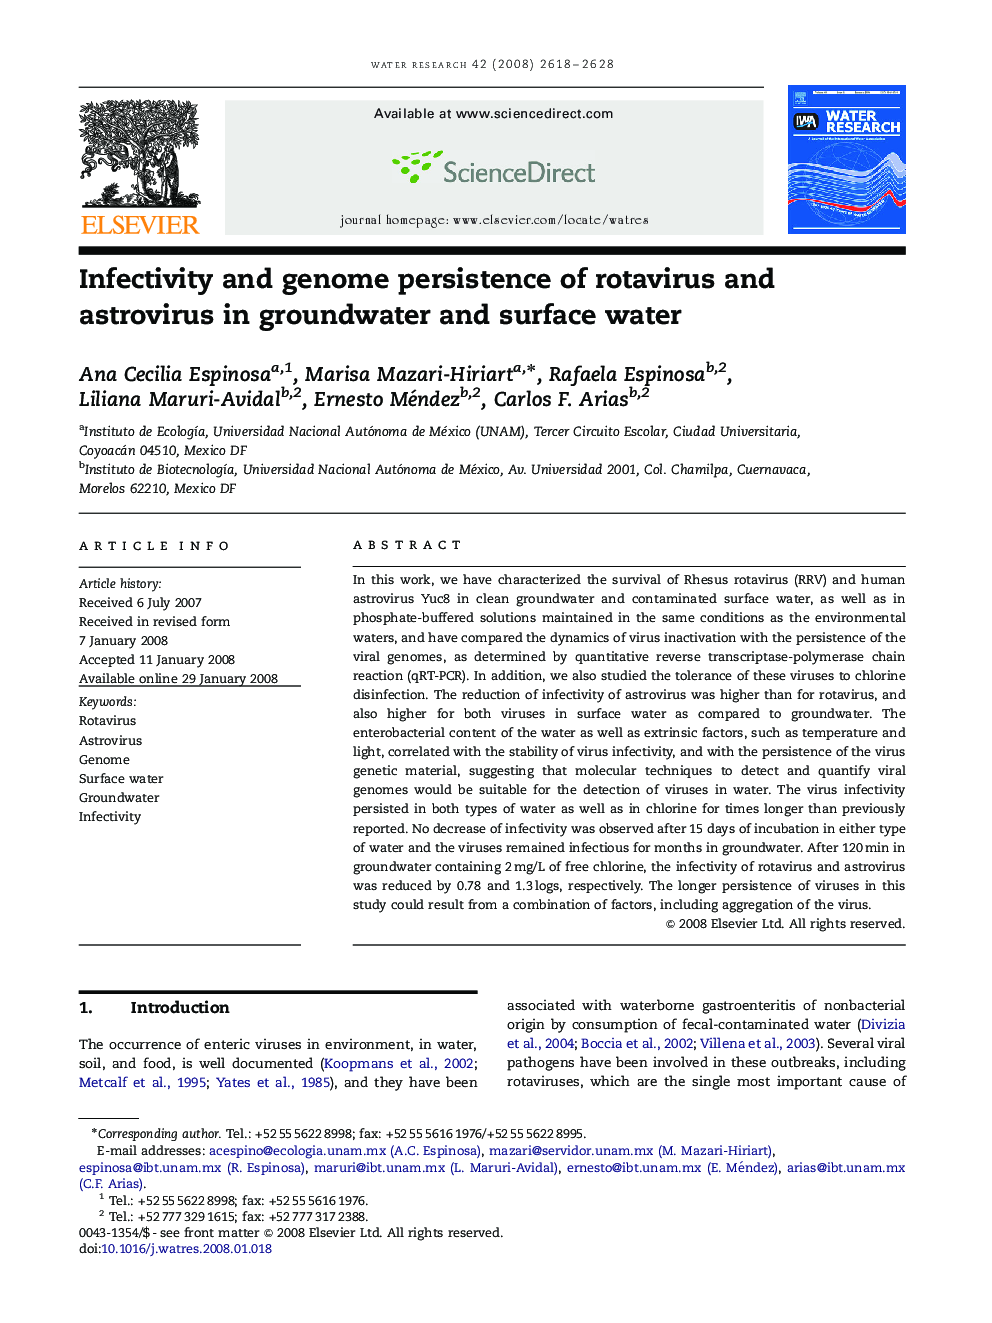 Infectivity and genome persistence of rotavirus and astrovirus in groundwater and surface water